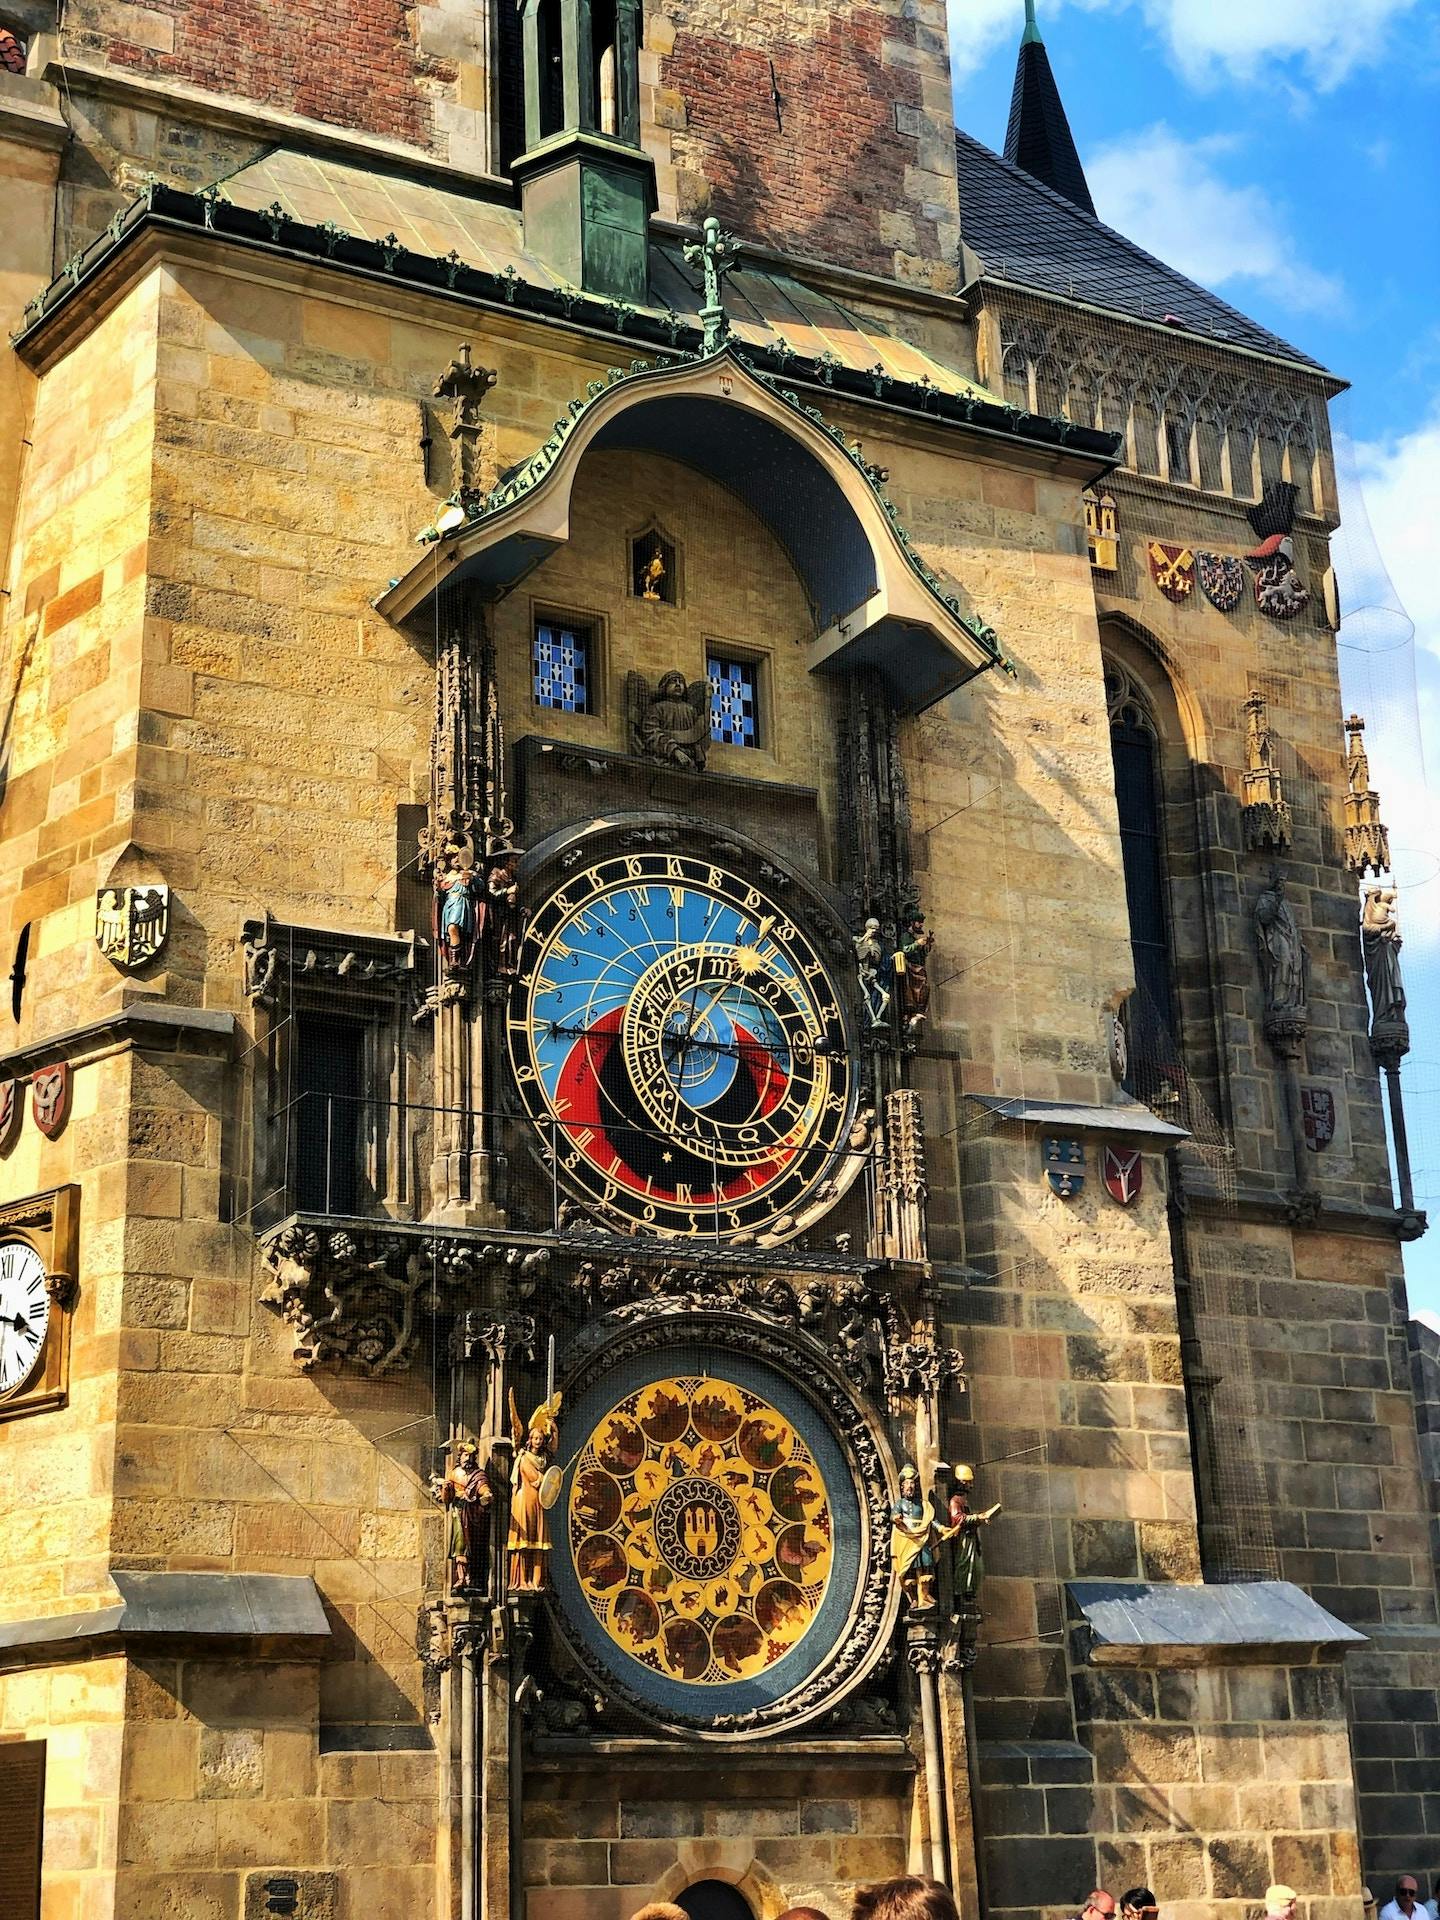 Prague guided tour with Old Town, Jewish Quarter, and Charles bridge